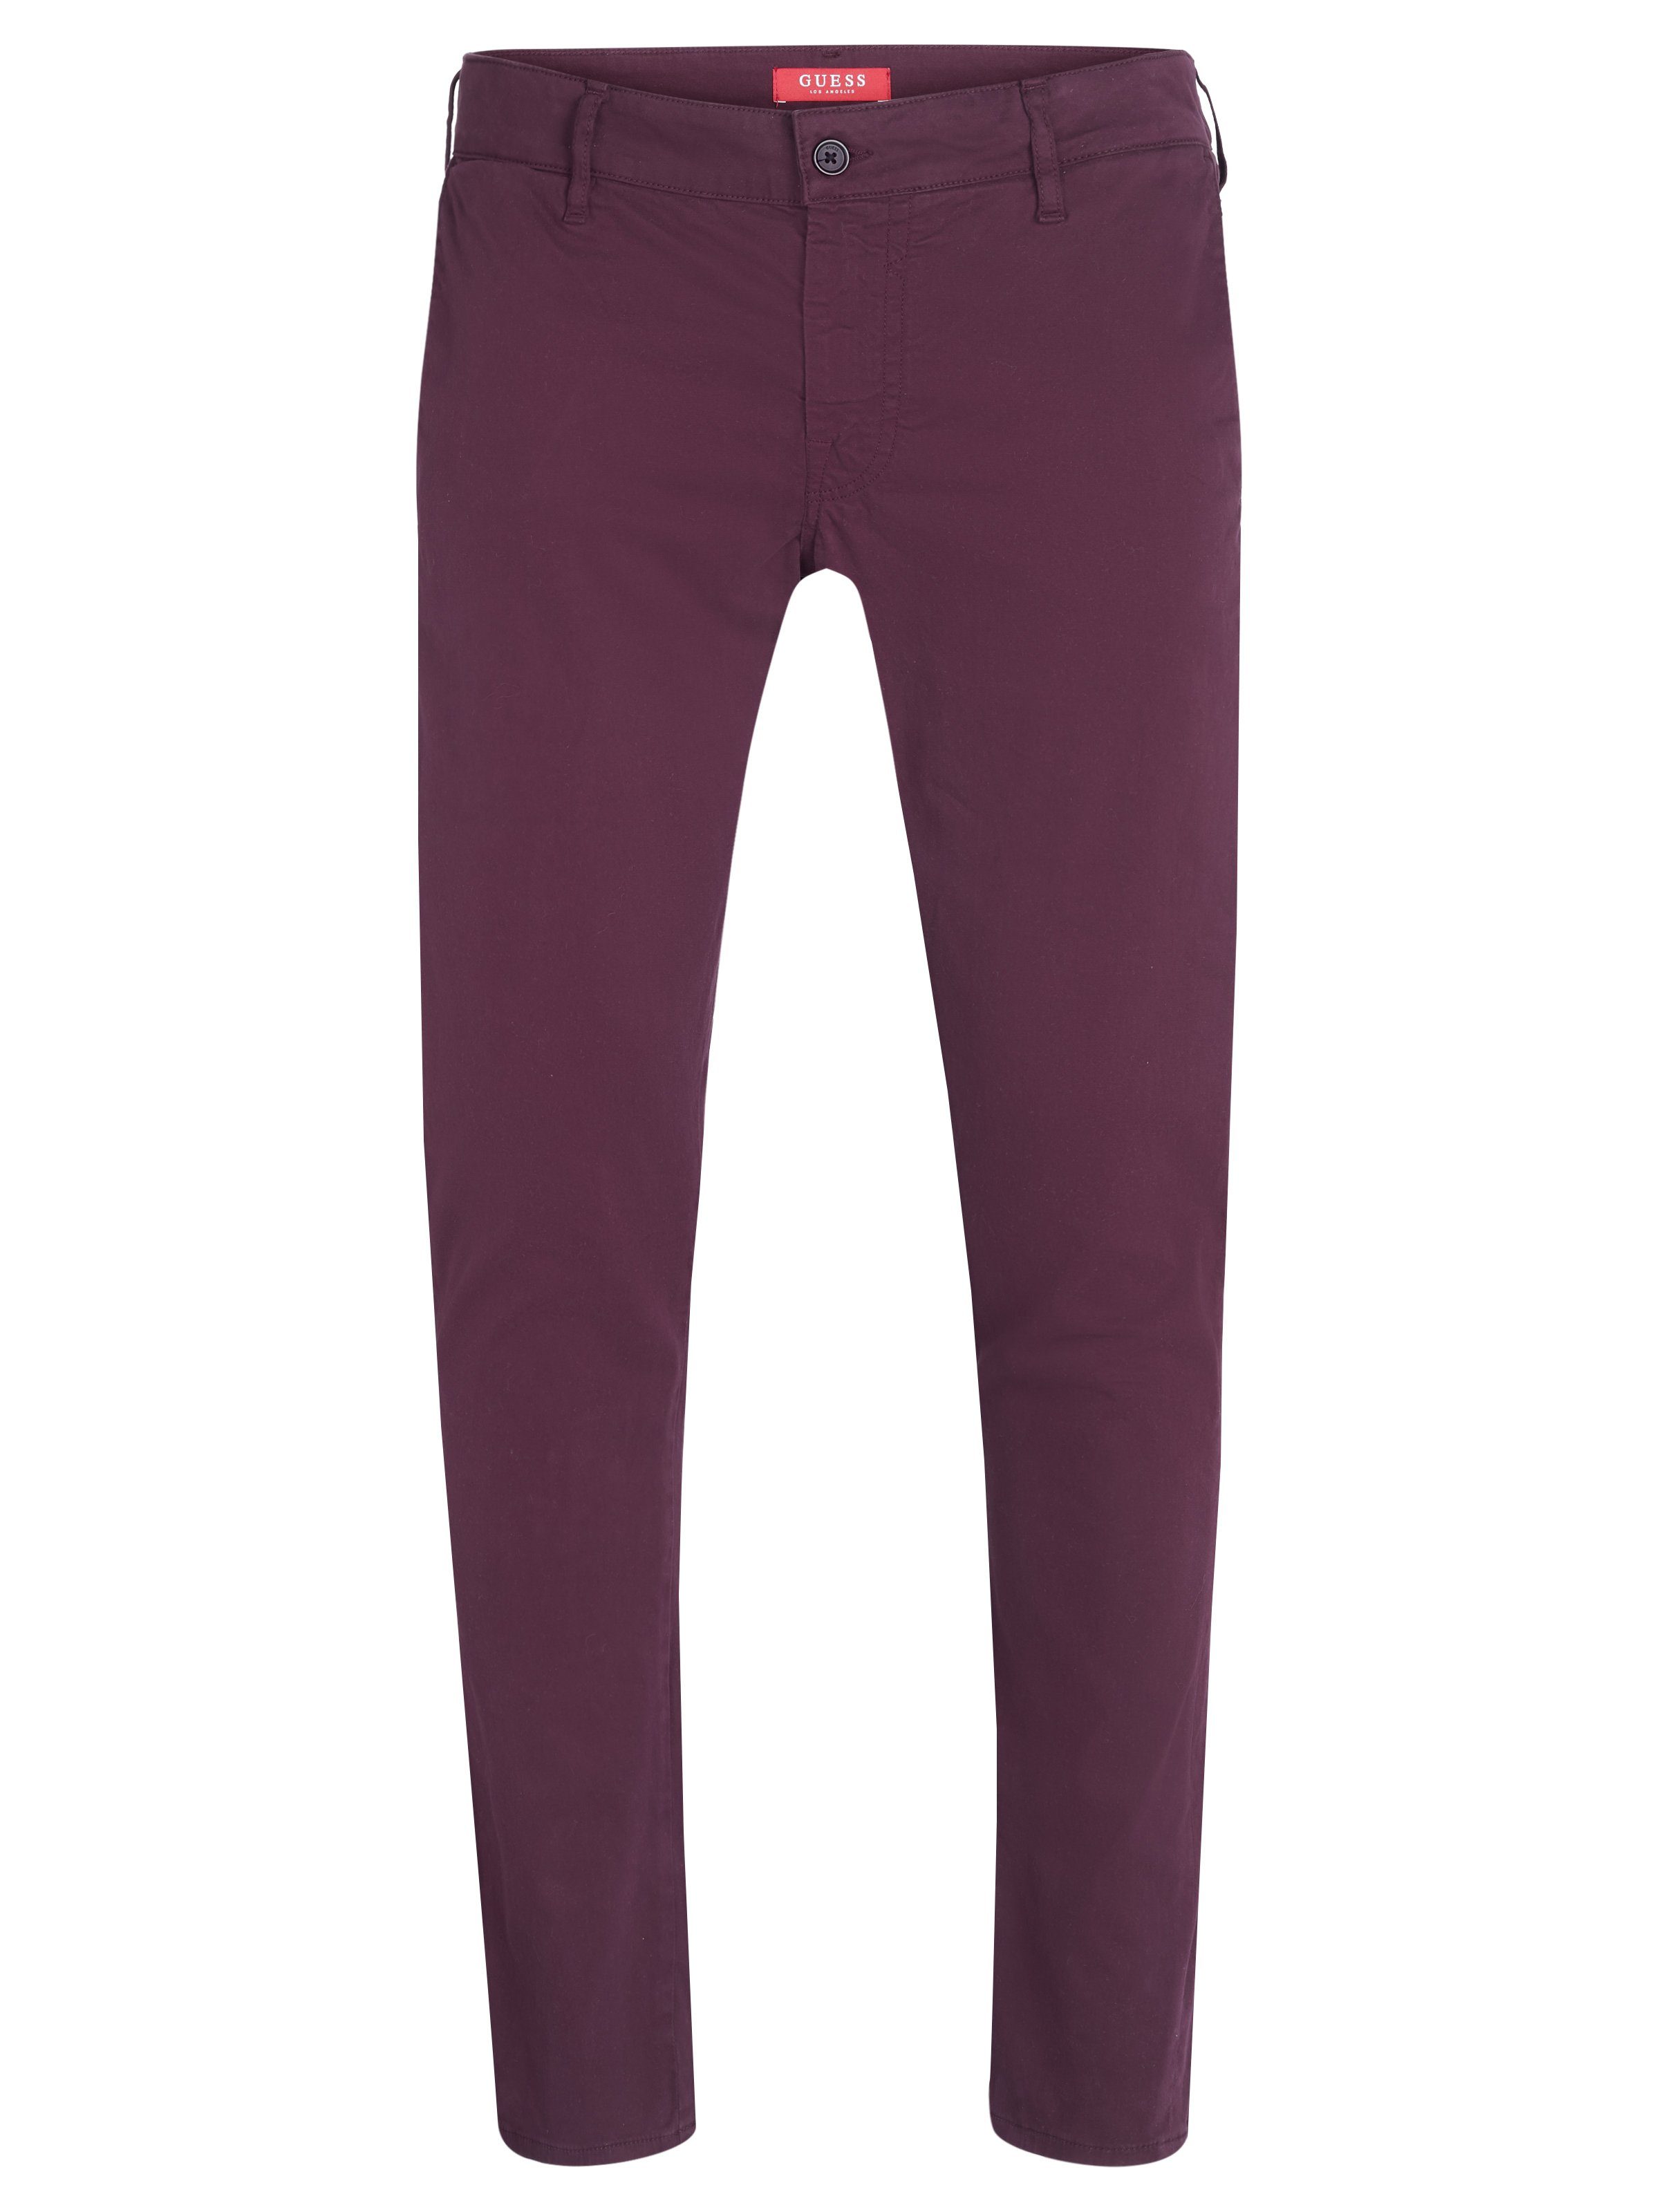 Guess Chinos GUESS Hose bordeaux